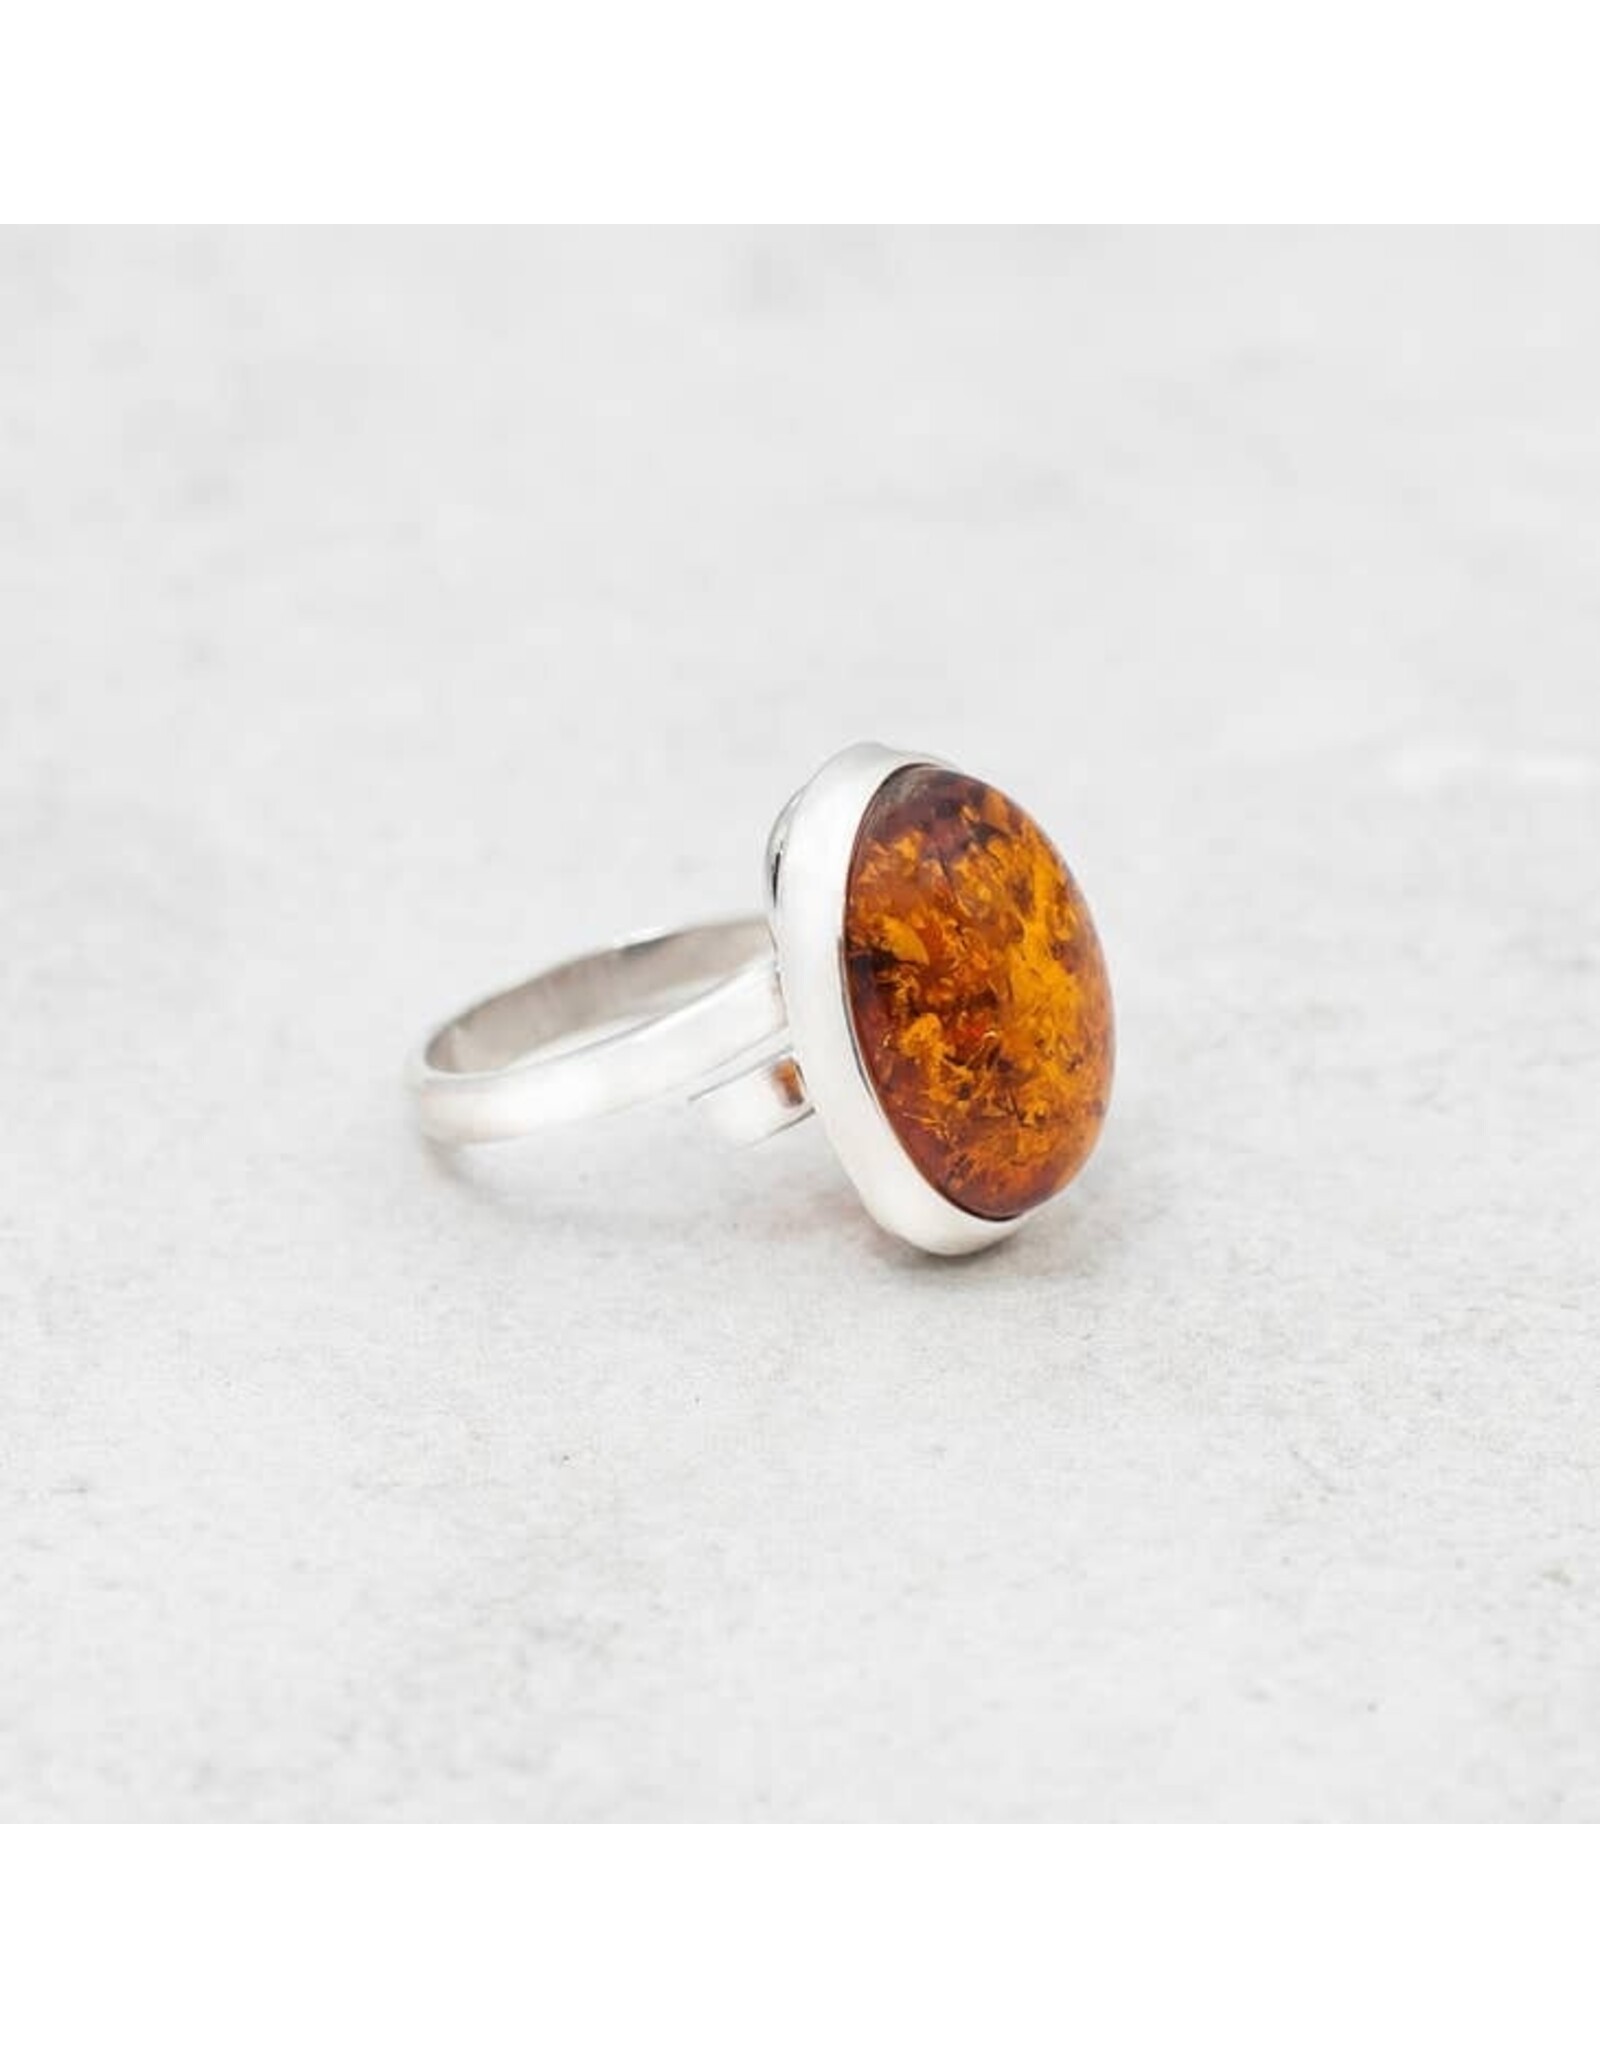 Baltic Cognac Amber 925 Silver Ring "Finesse"